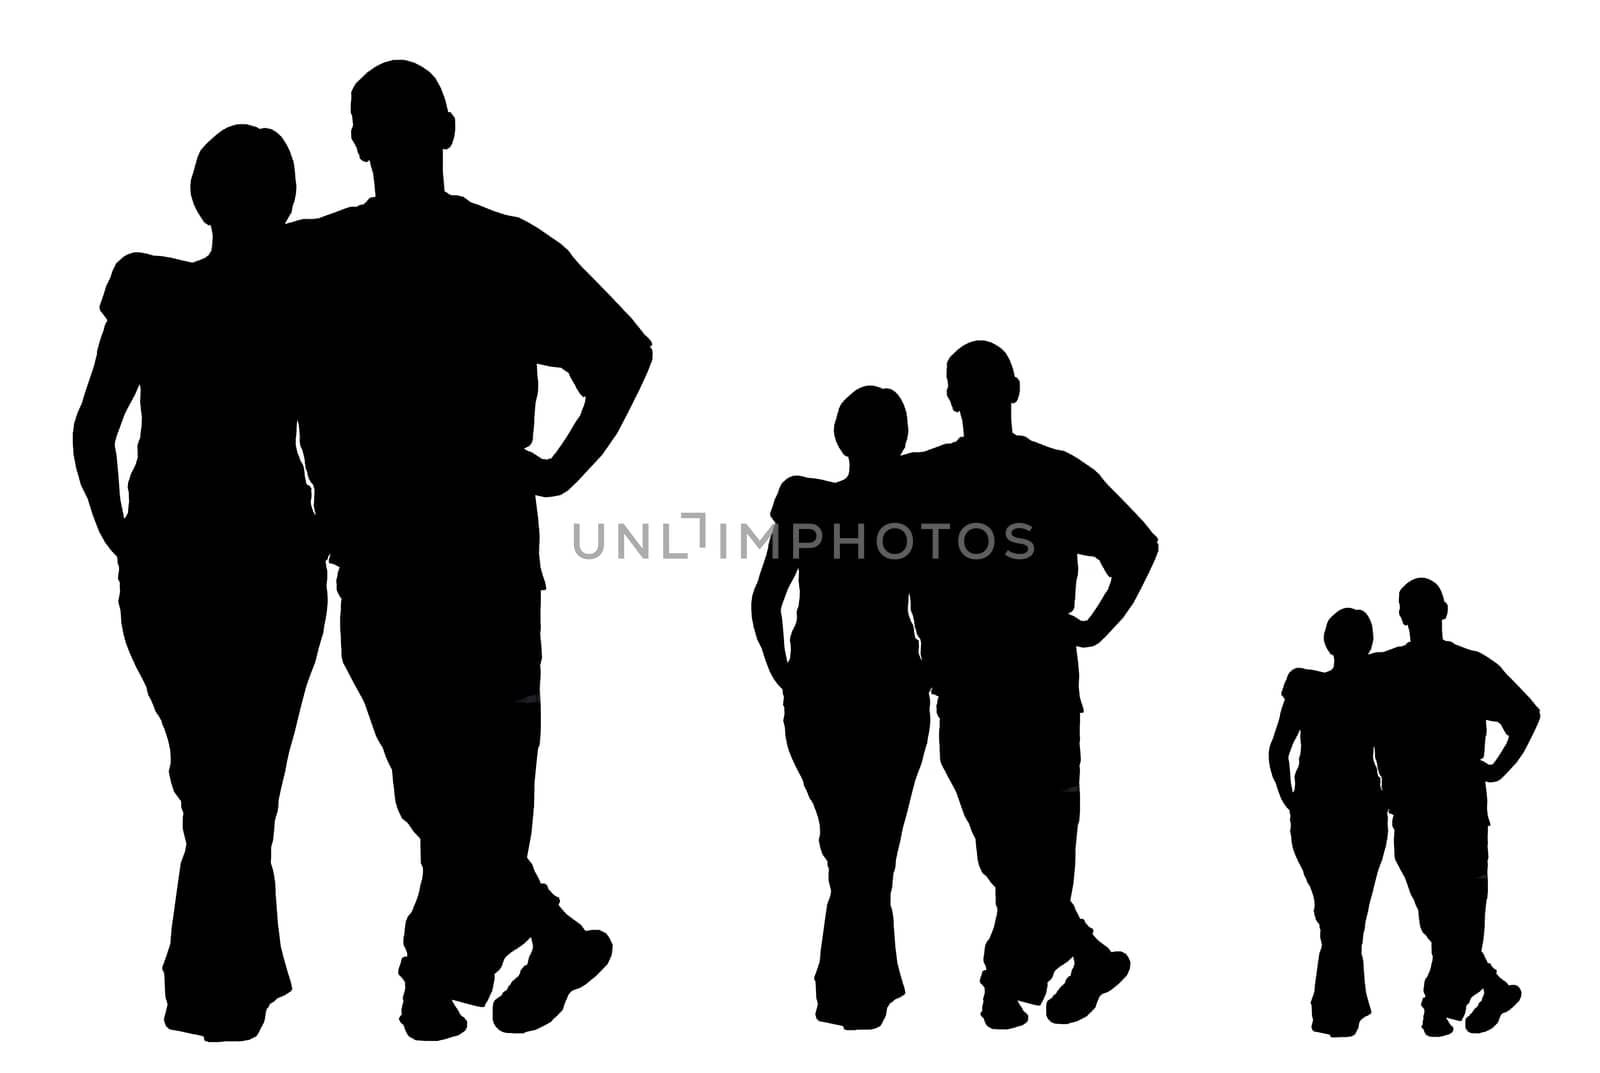 collage of silhouettes of men and women by zhannaprokopeva